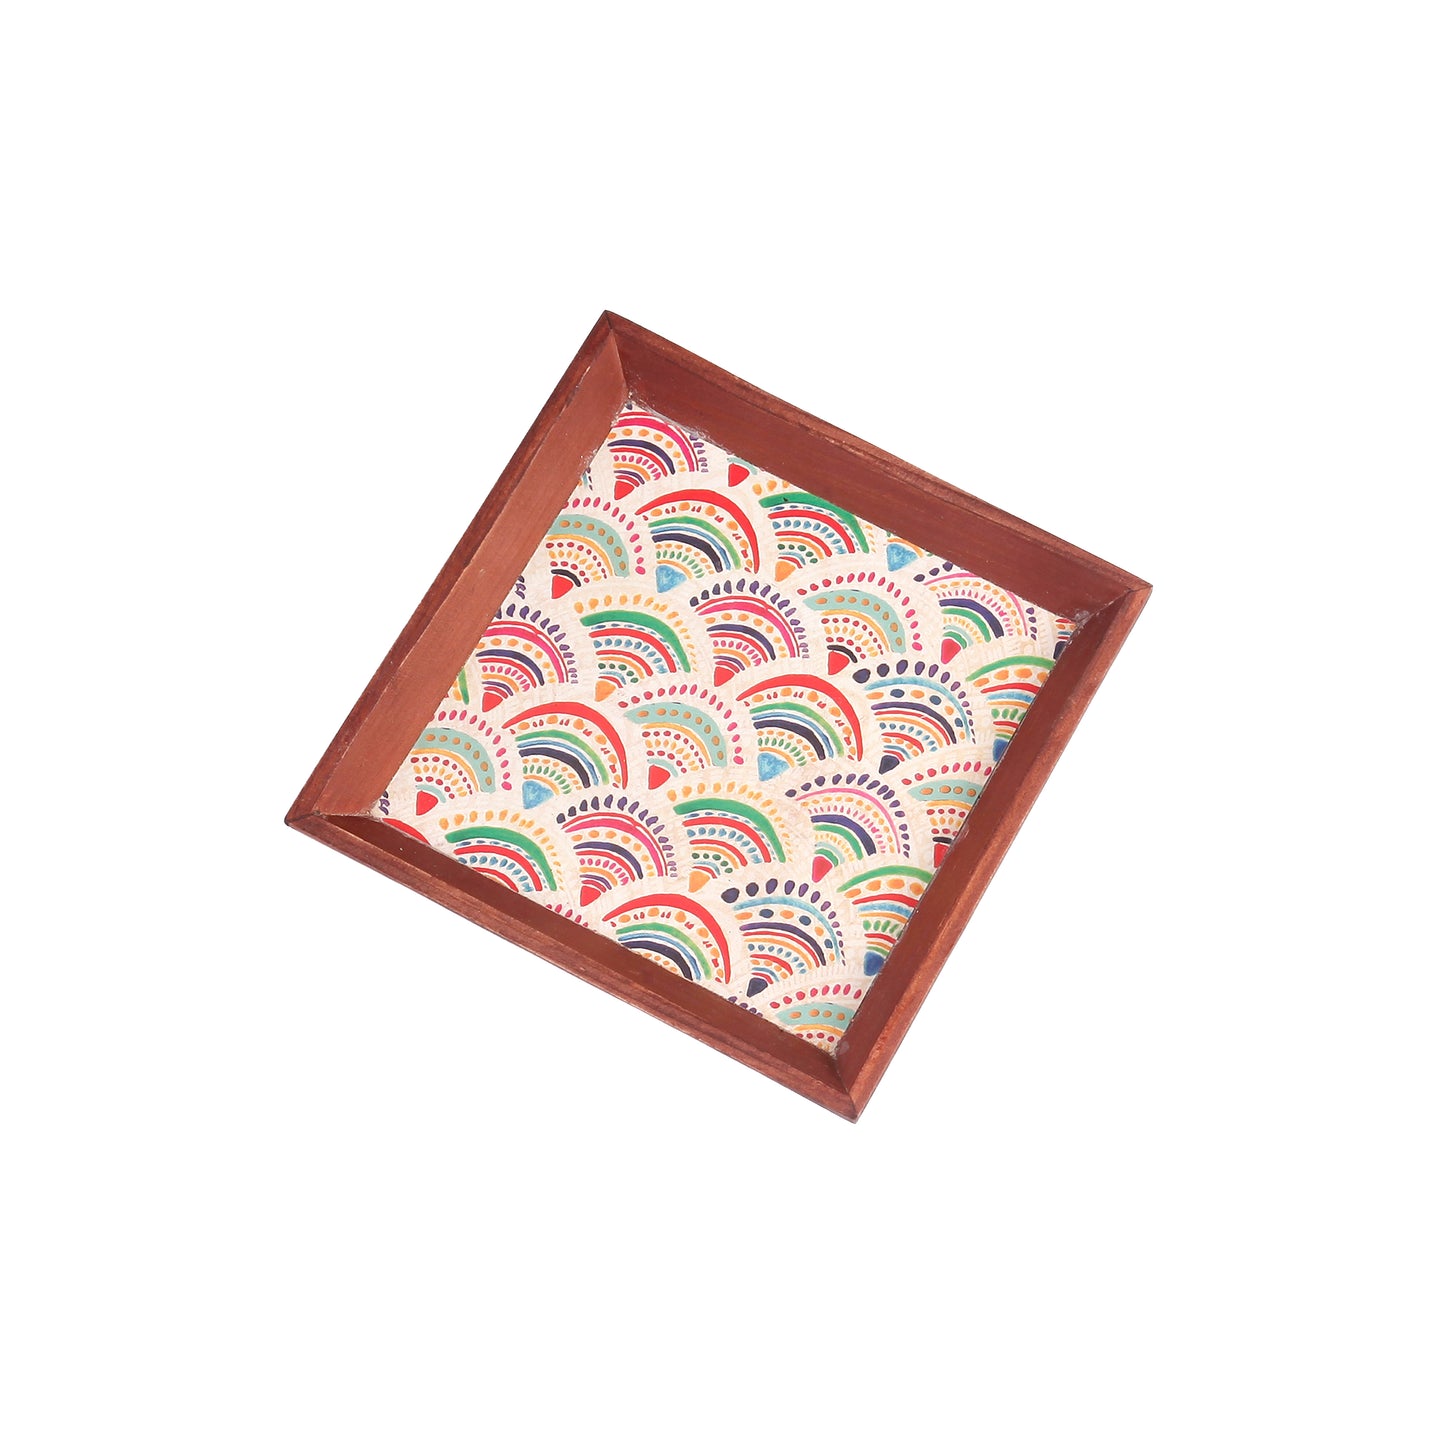 A Tiny Mistake Pankha Small Square Wooden Serving Tray, 18 x 18 x 2 cm